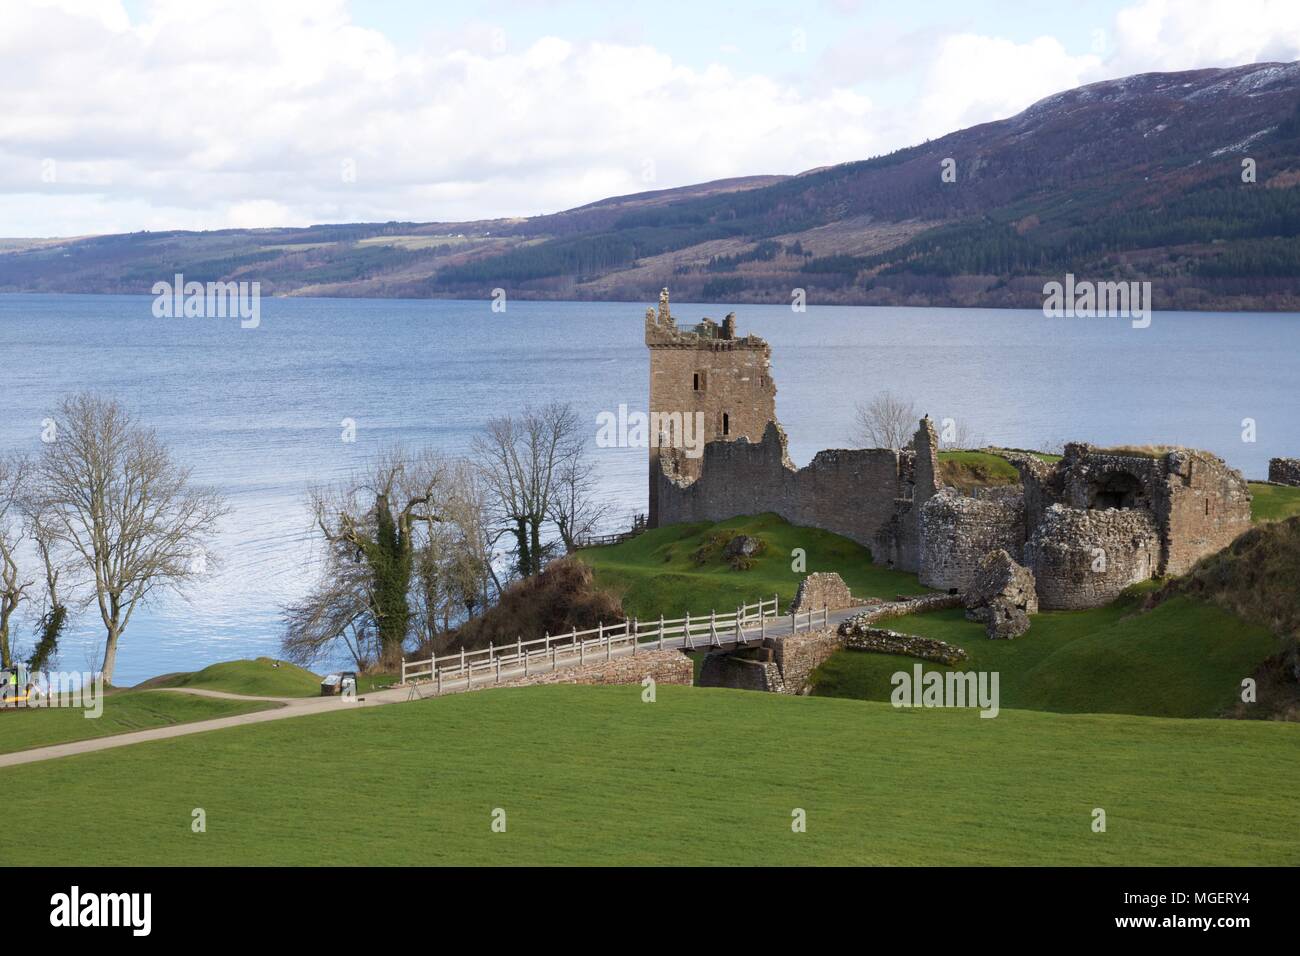 The ruins of the castle of Urquhart in Scotland on the shores of Lake Lochness, the castle stood in the middle of the green remained only more a tower Stock Photo